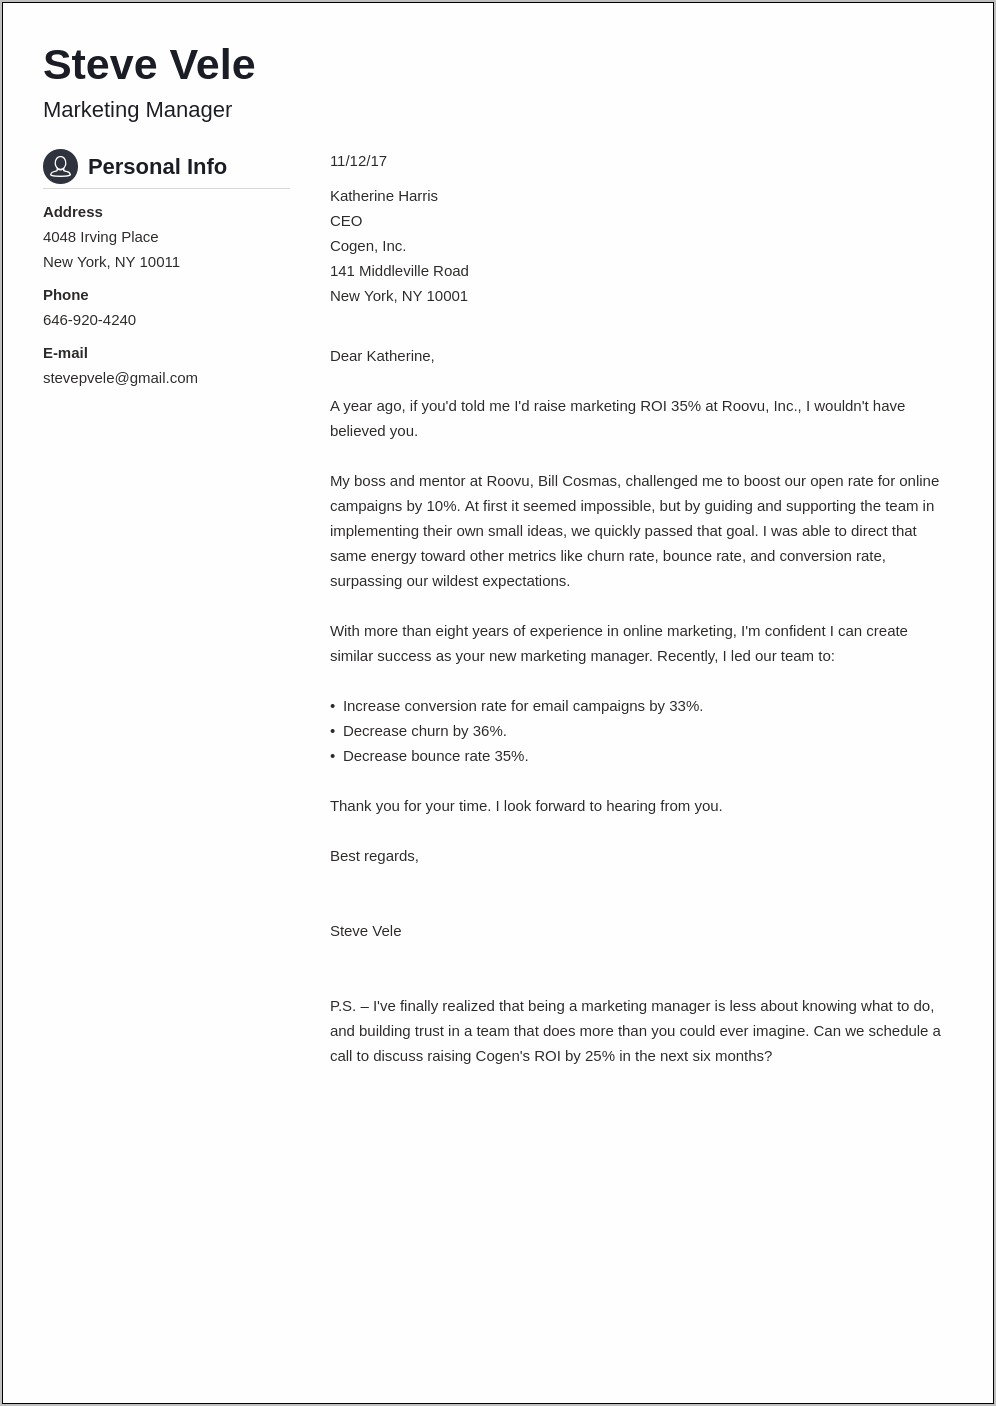 Resume Cover Letter To A Group